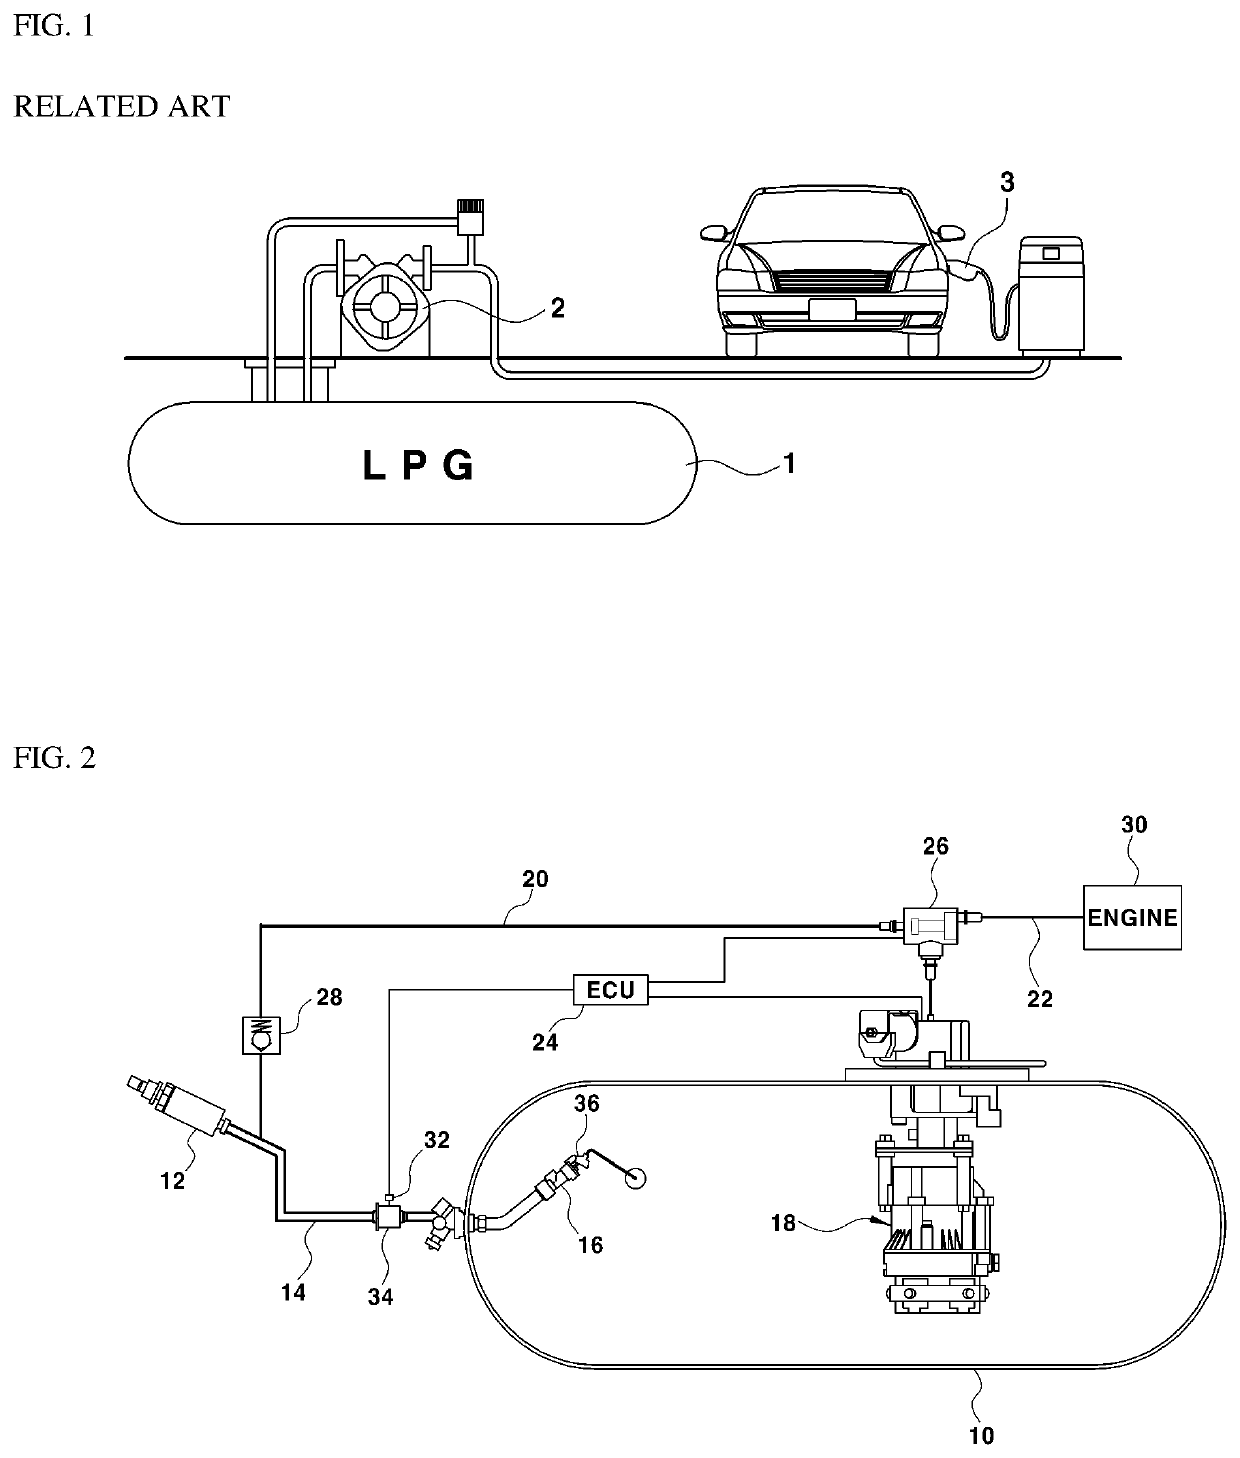 Fuel-filling system of LPG vehicle